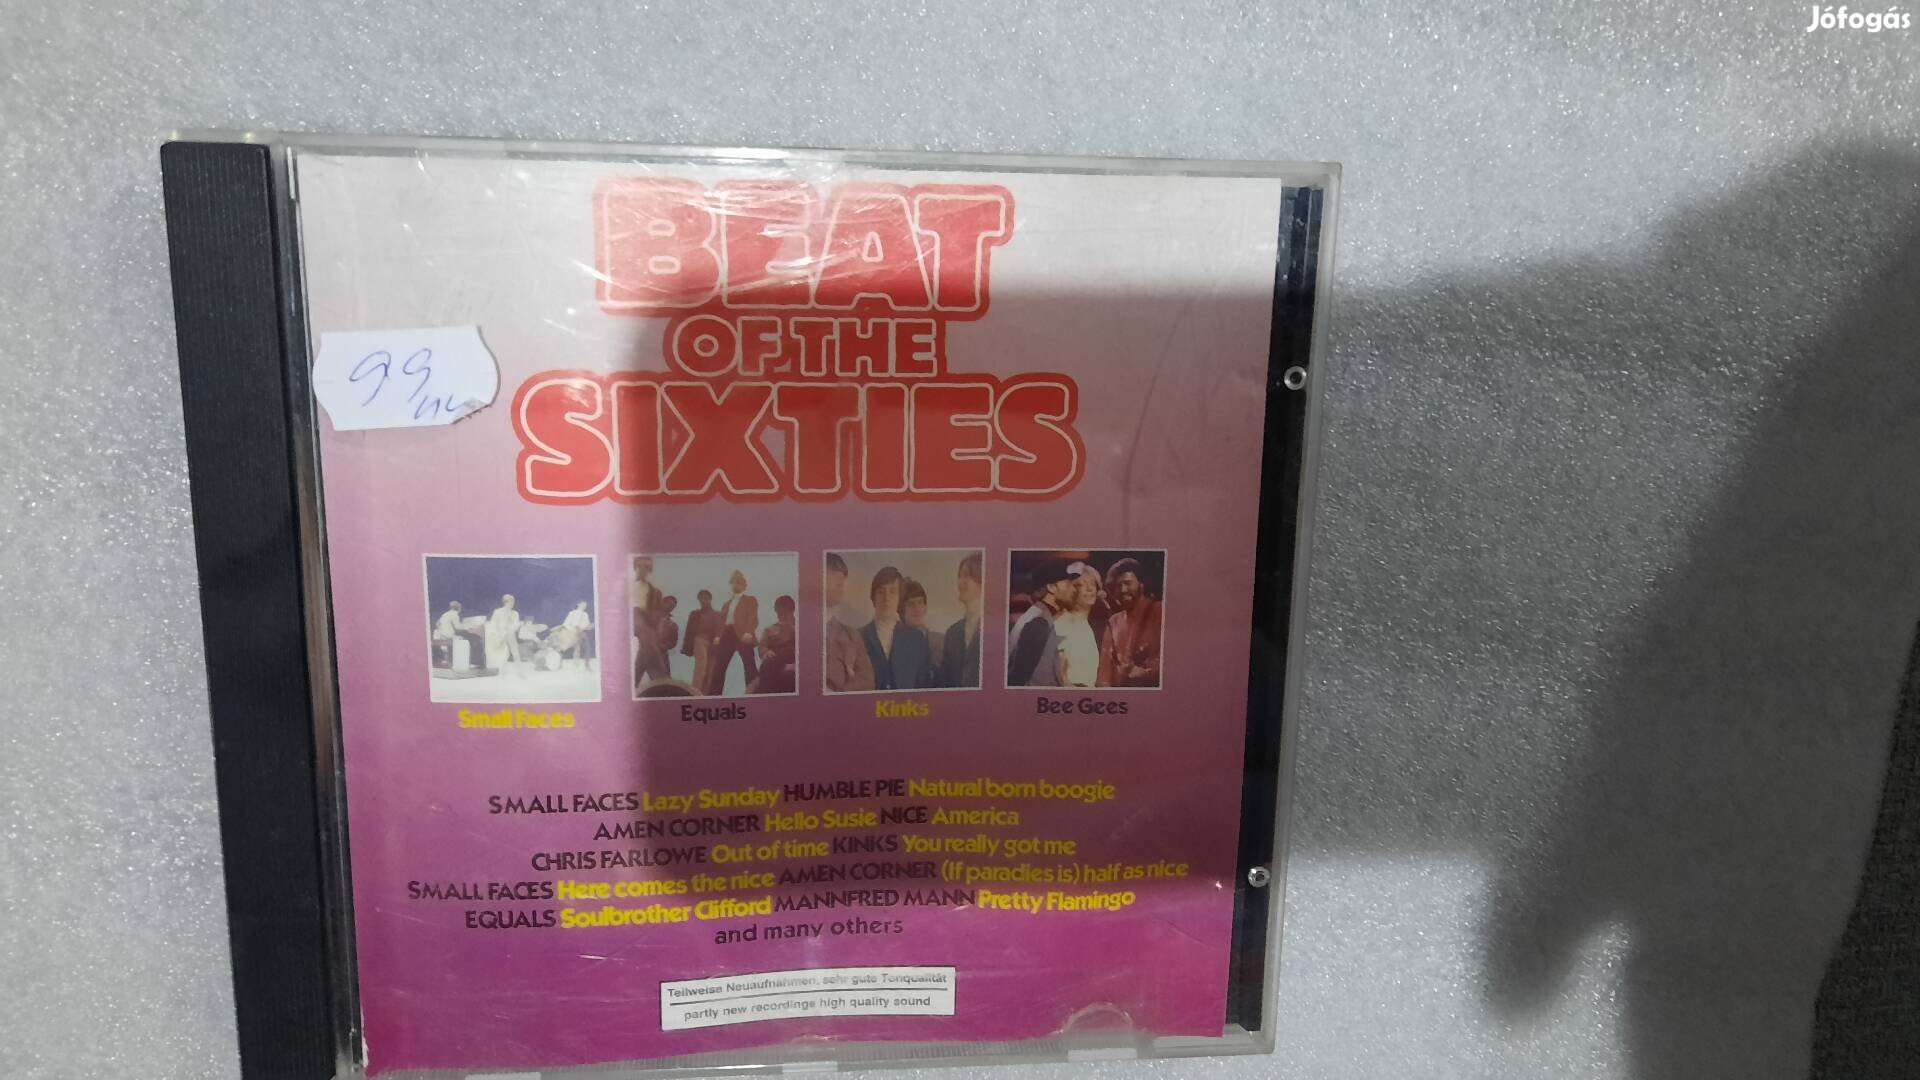 Beat of the Sixties cd